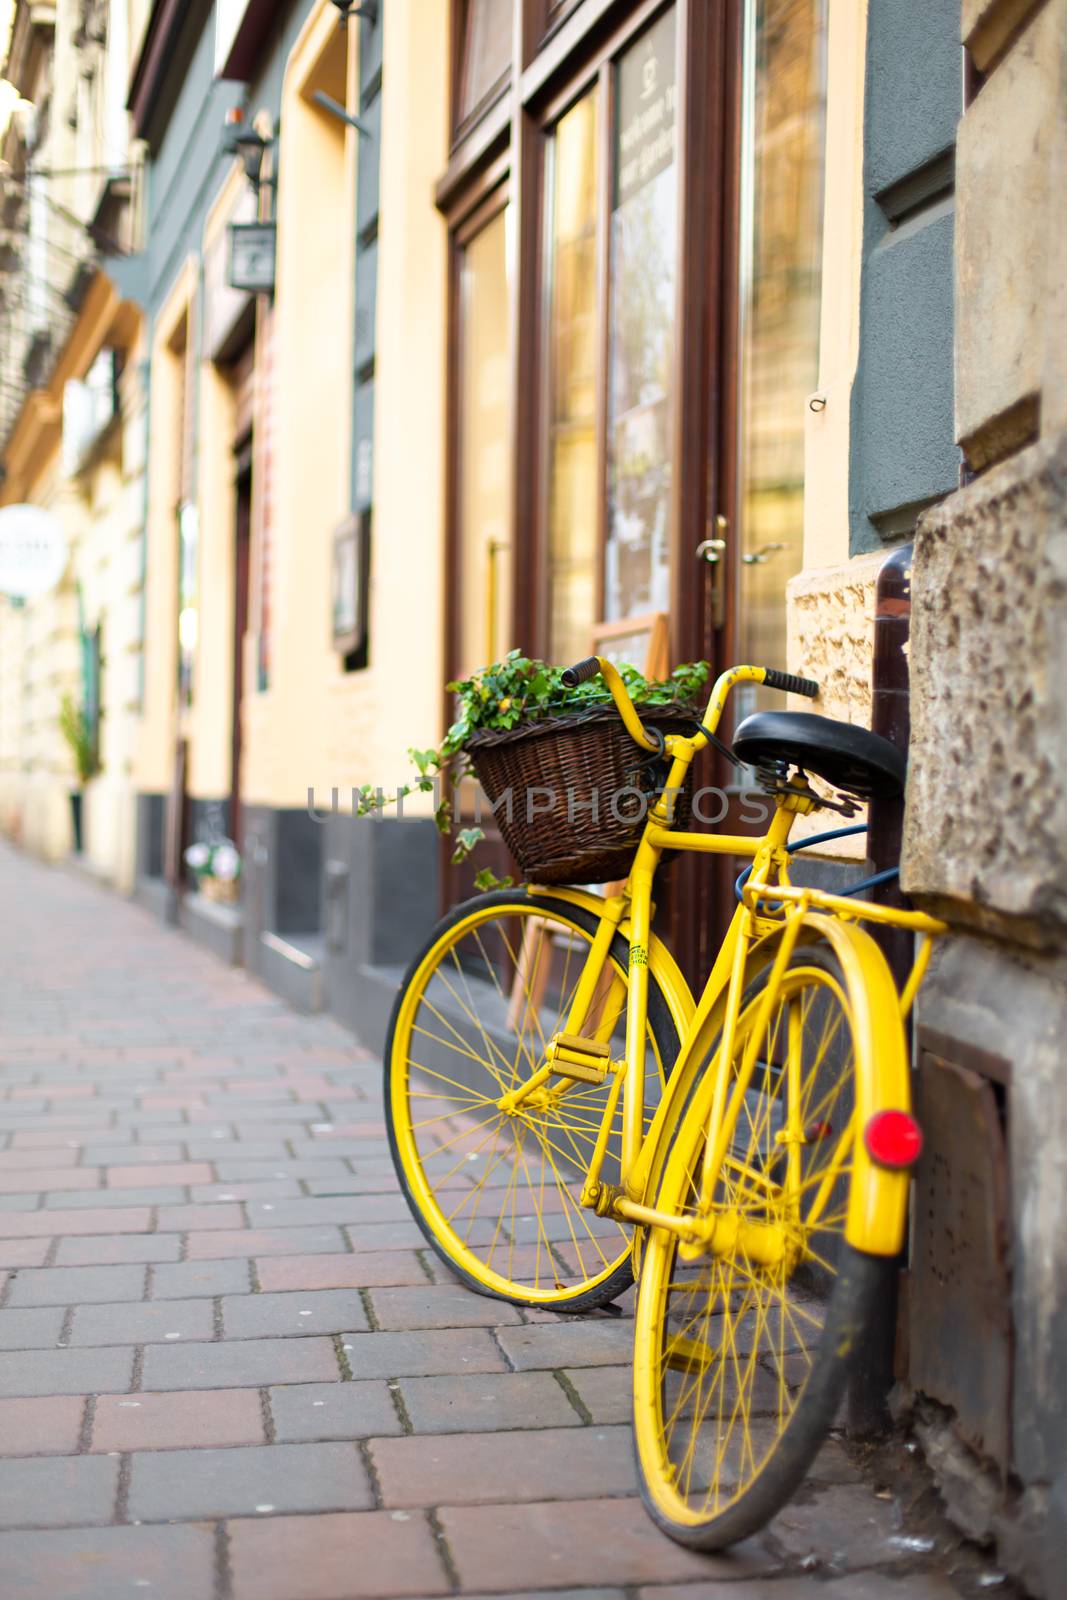 Cityscape of the old cozy European city. A flower pot from an old bicycle.